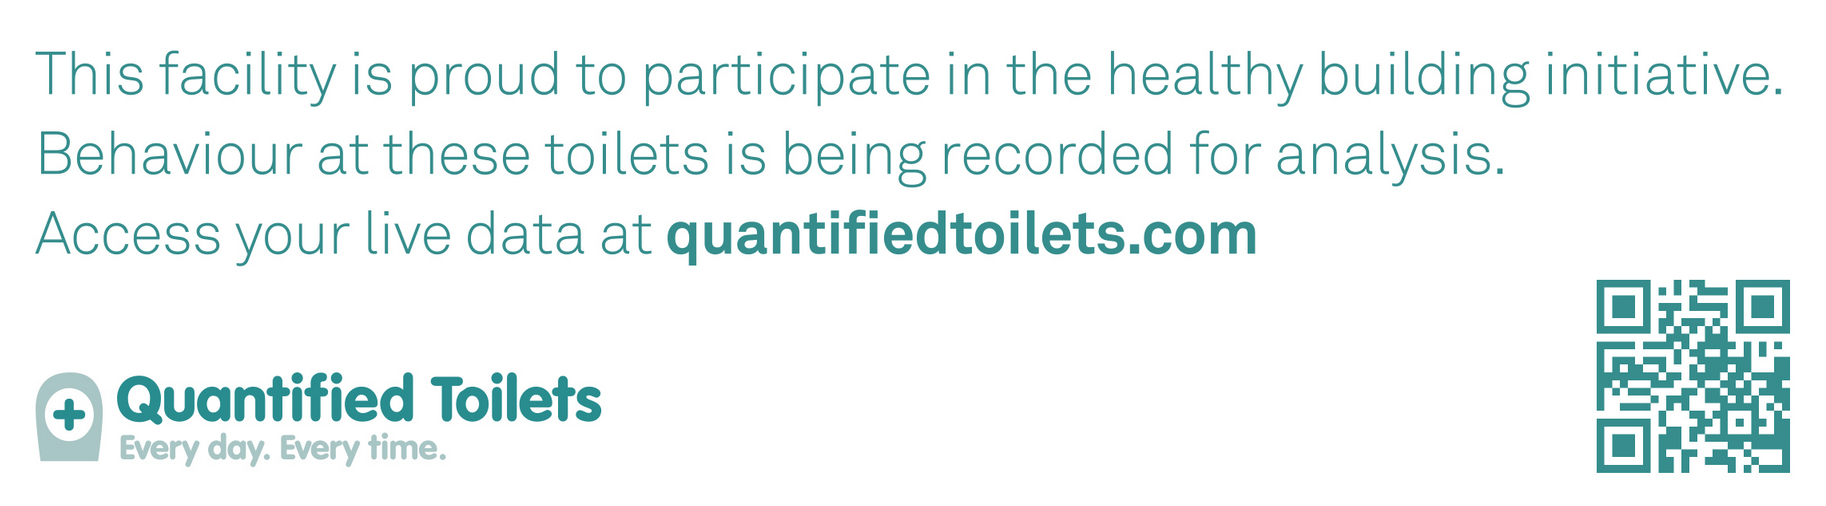 Quantified Toilets sign